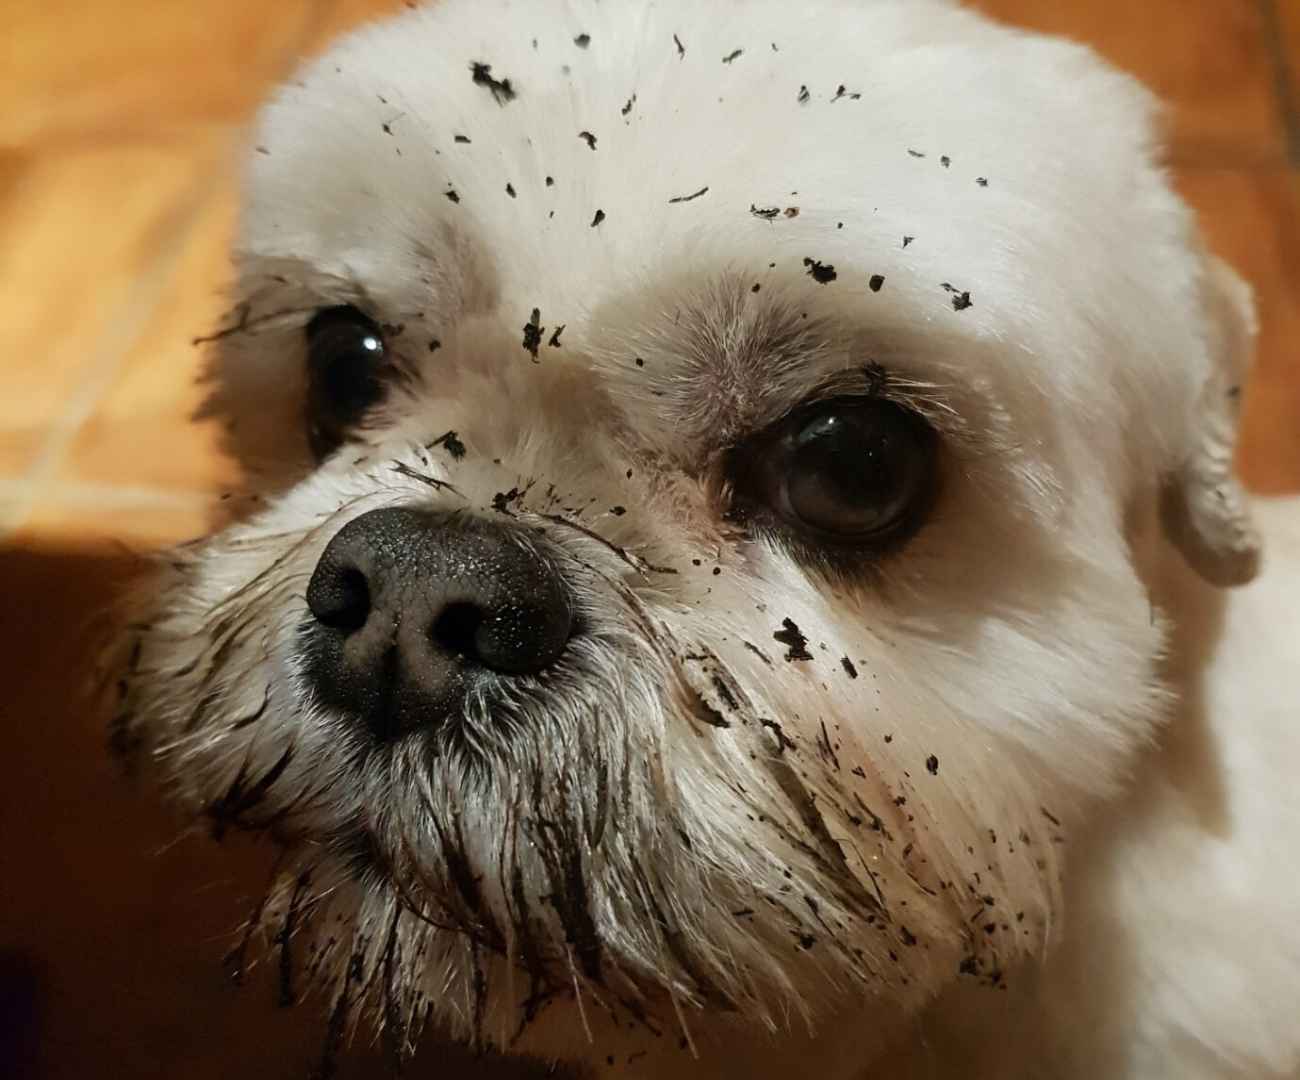 Close up of Coco the very cute white Lhasa Apso dog with a dirty face where she has been burying treats in the mud